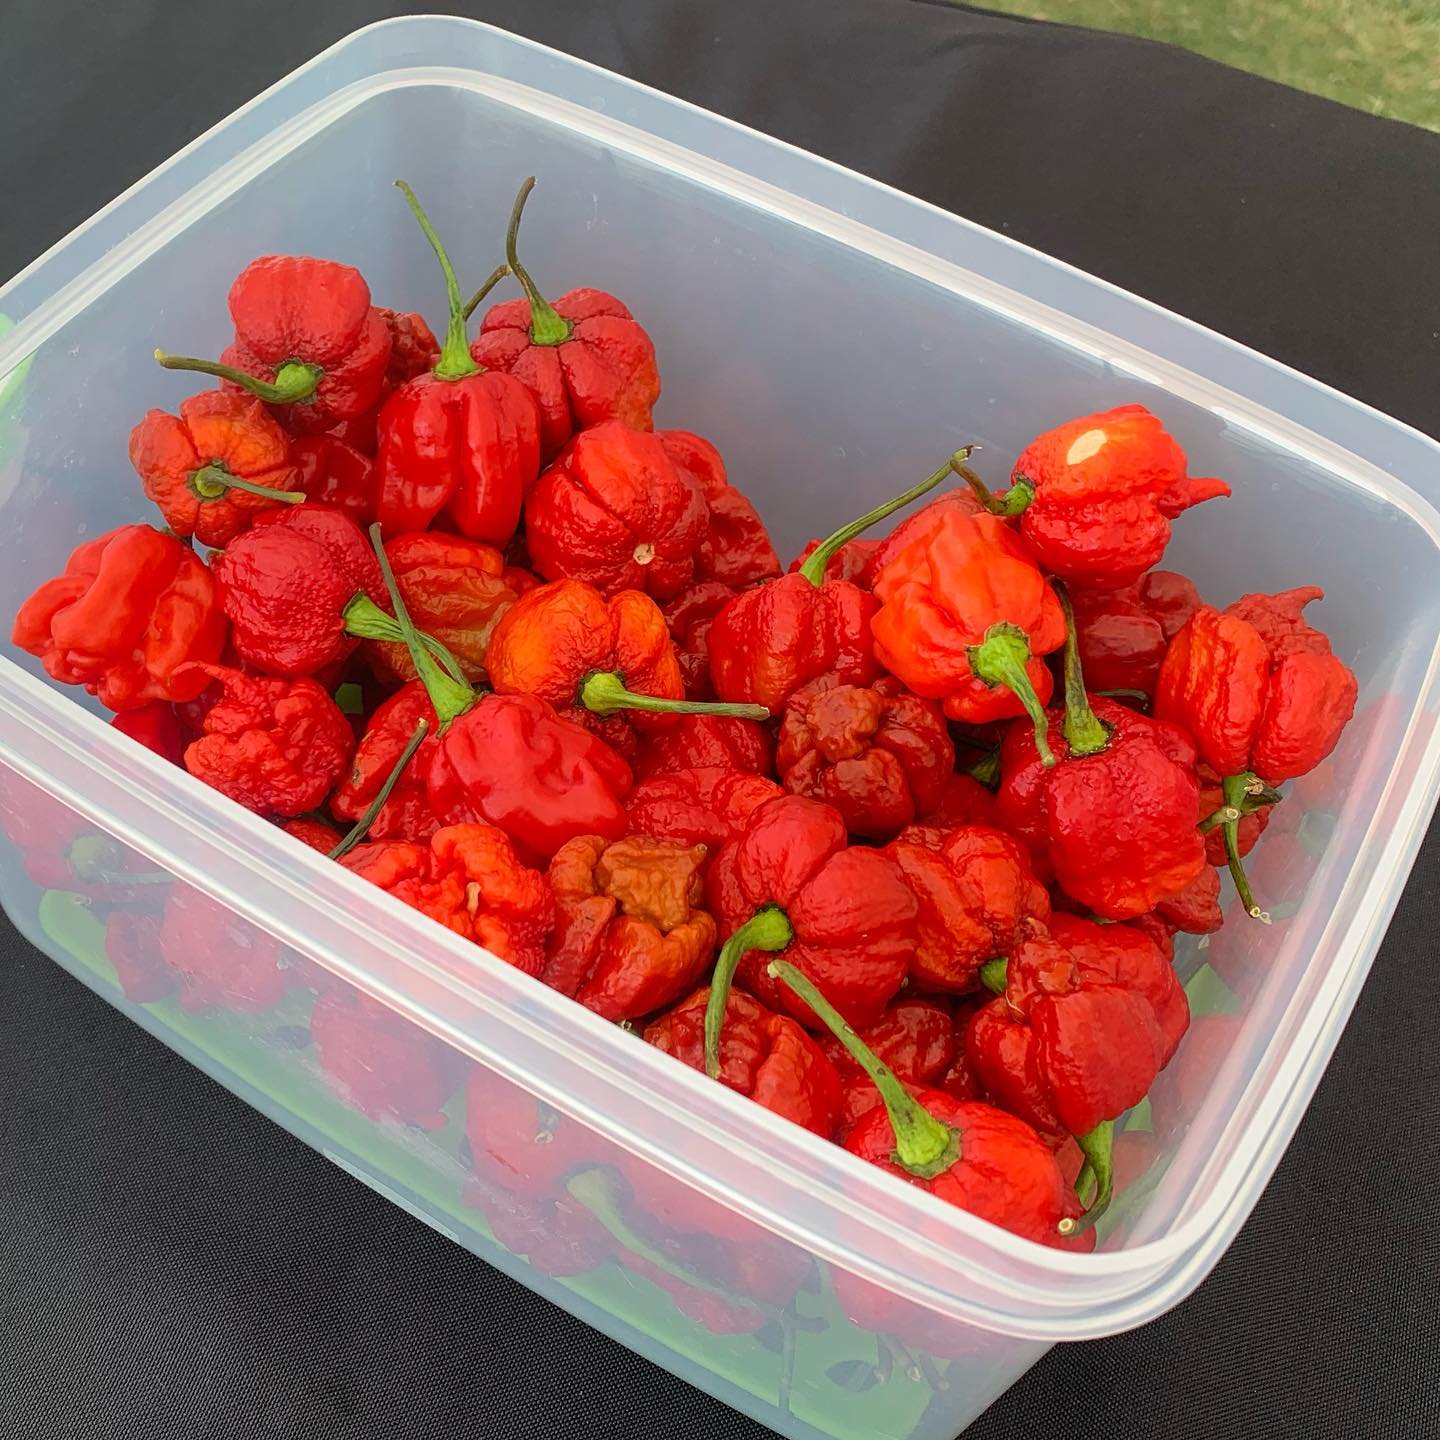 San Diego Pepper Enthusiast Eats 44 Carolina Reapers The World S Hottest Chilis